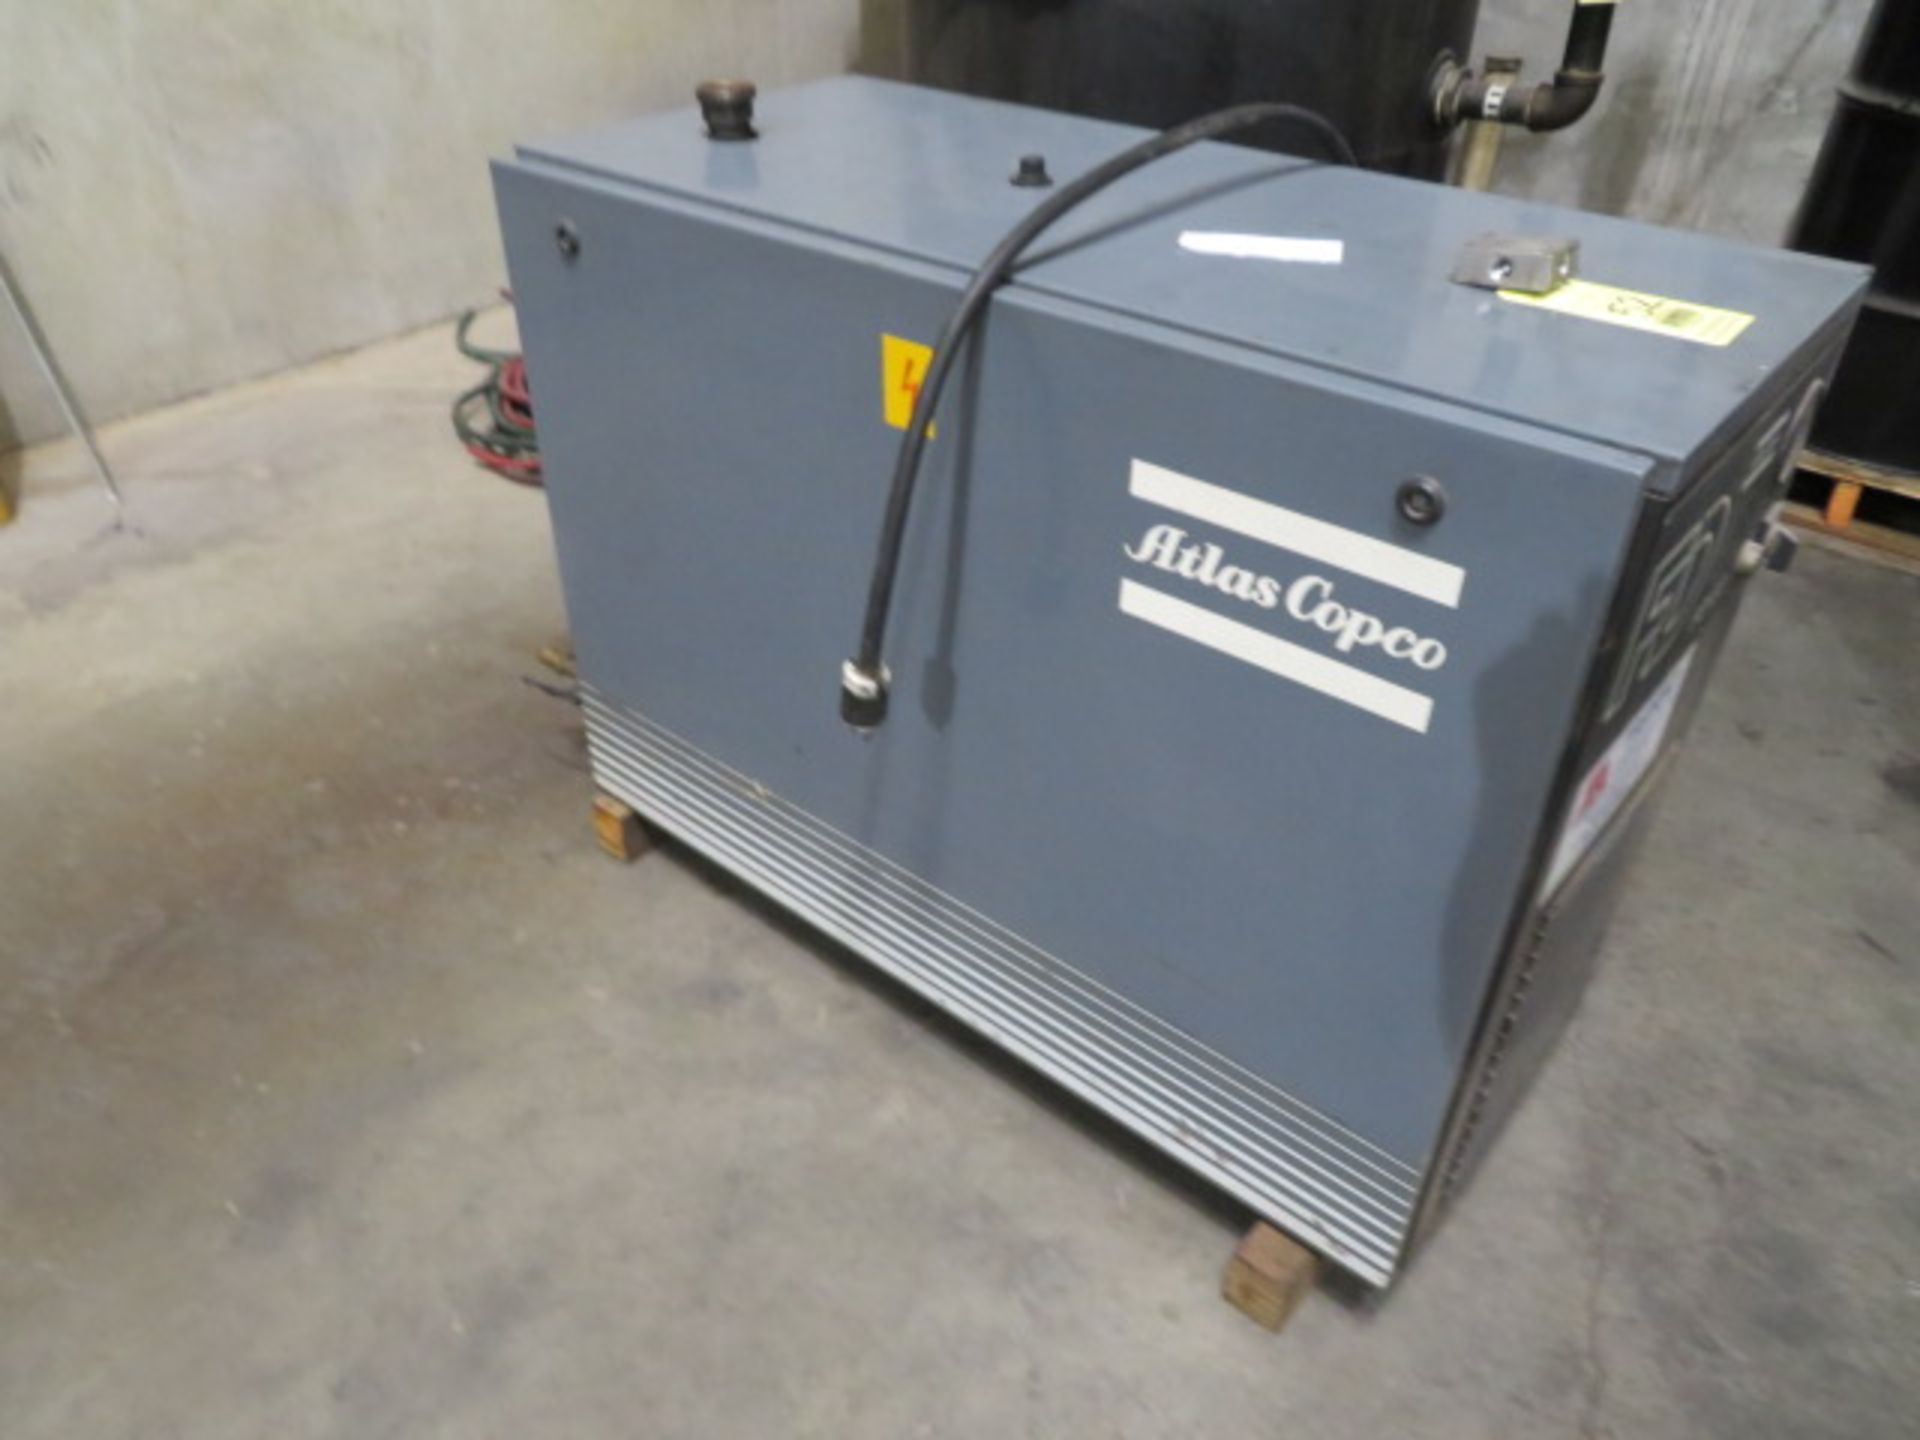 REFRIGERATED AIR DRYER, ATLAS COPCO MDL. FD122 (out of service) - Image 2 of 3